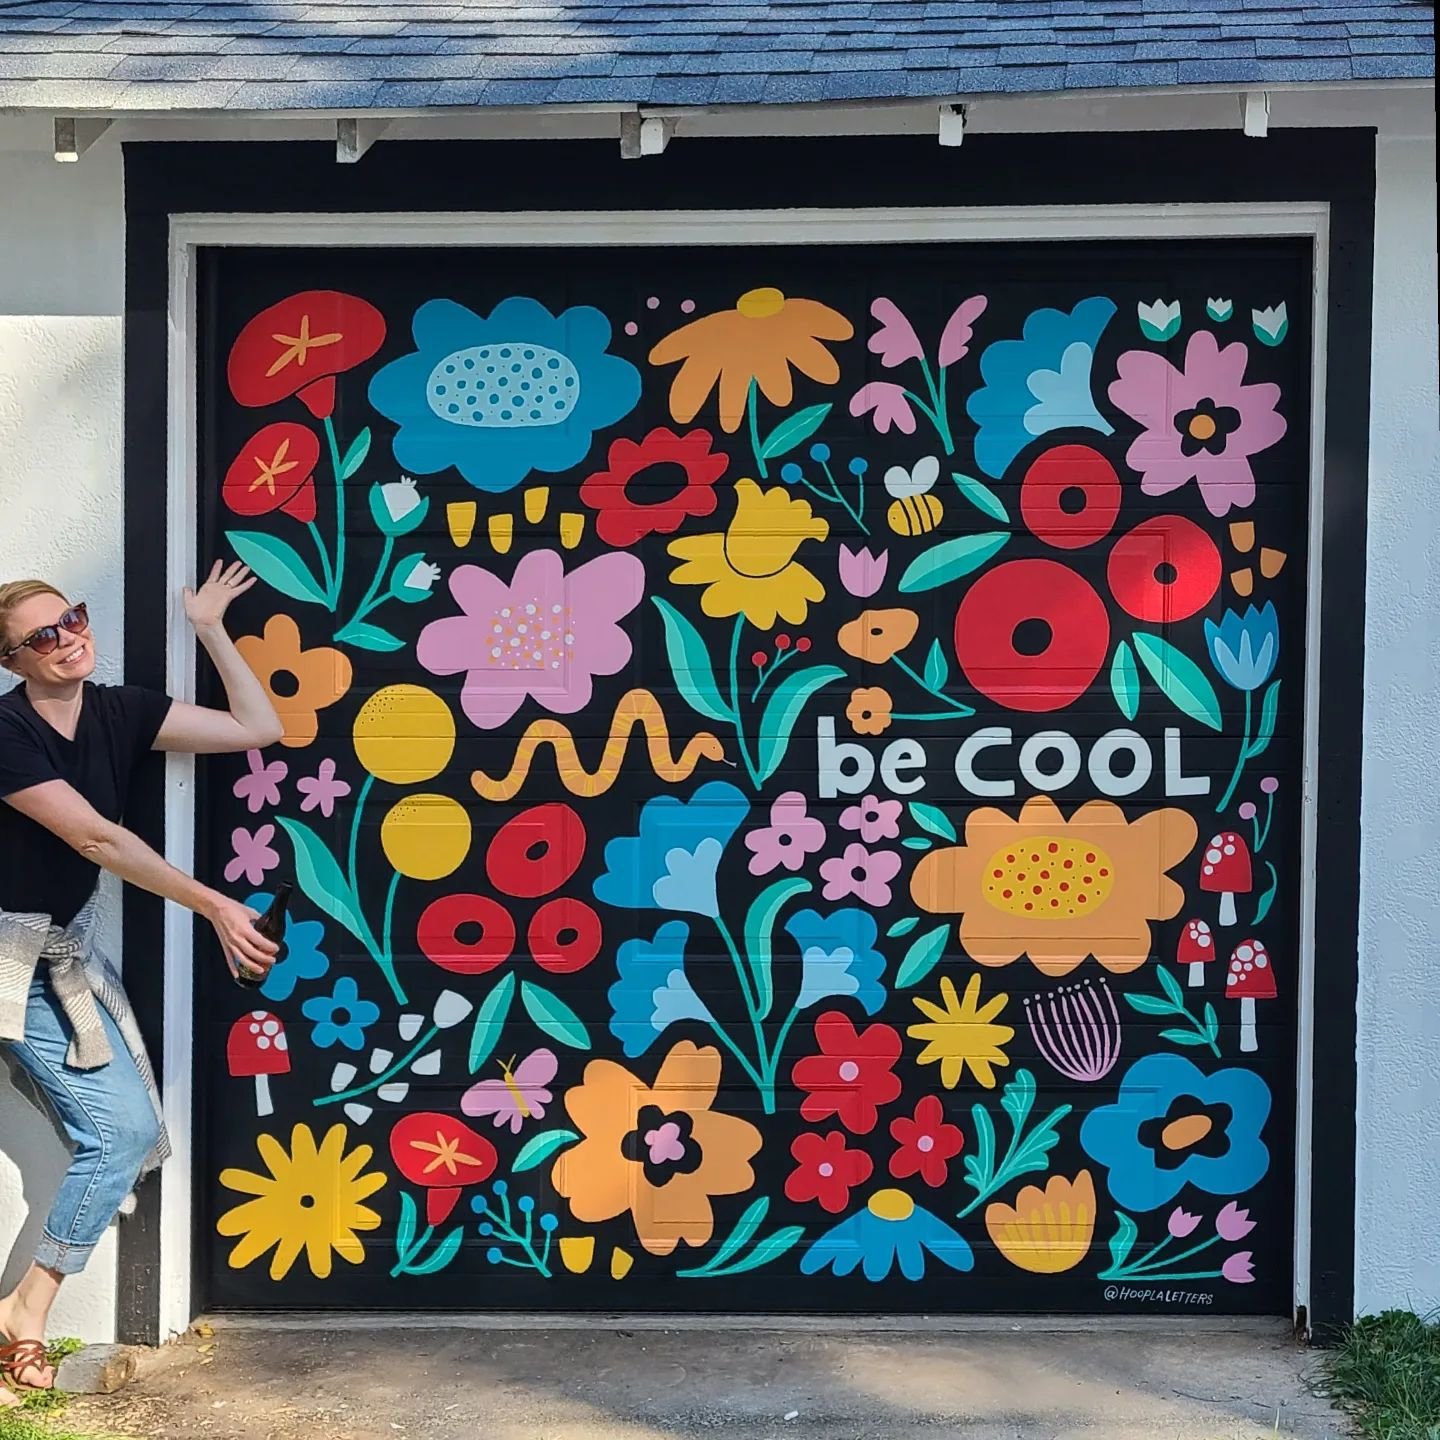 Happy @broadripplefloweralley Revival Day! Here's my #broadripplefloweralley mural that I finished just in time for the fall revival last year. Murals are great ways to brighten and infuse personality into your space - plus, can you say perfect photo